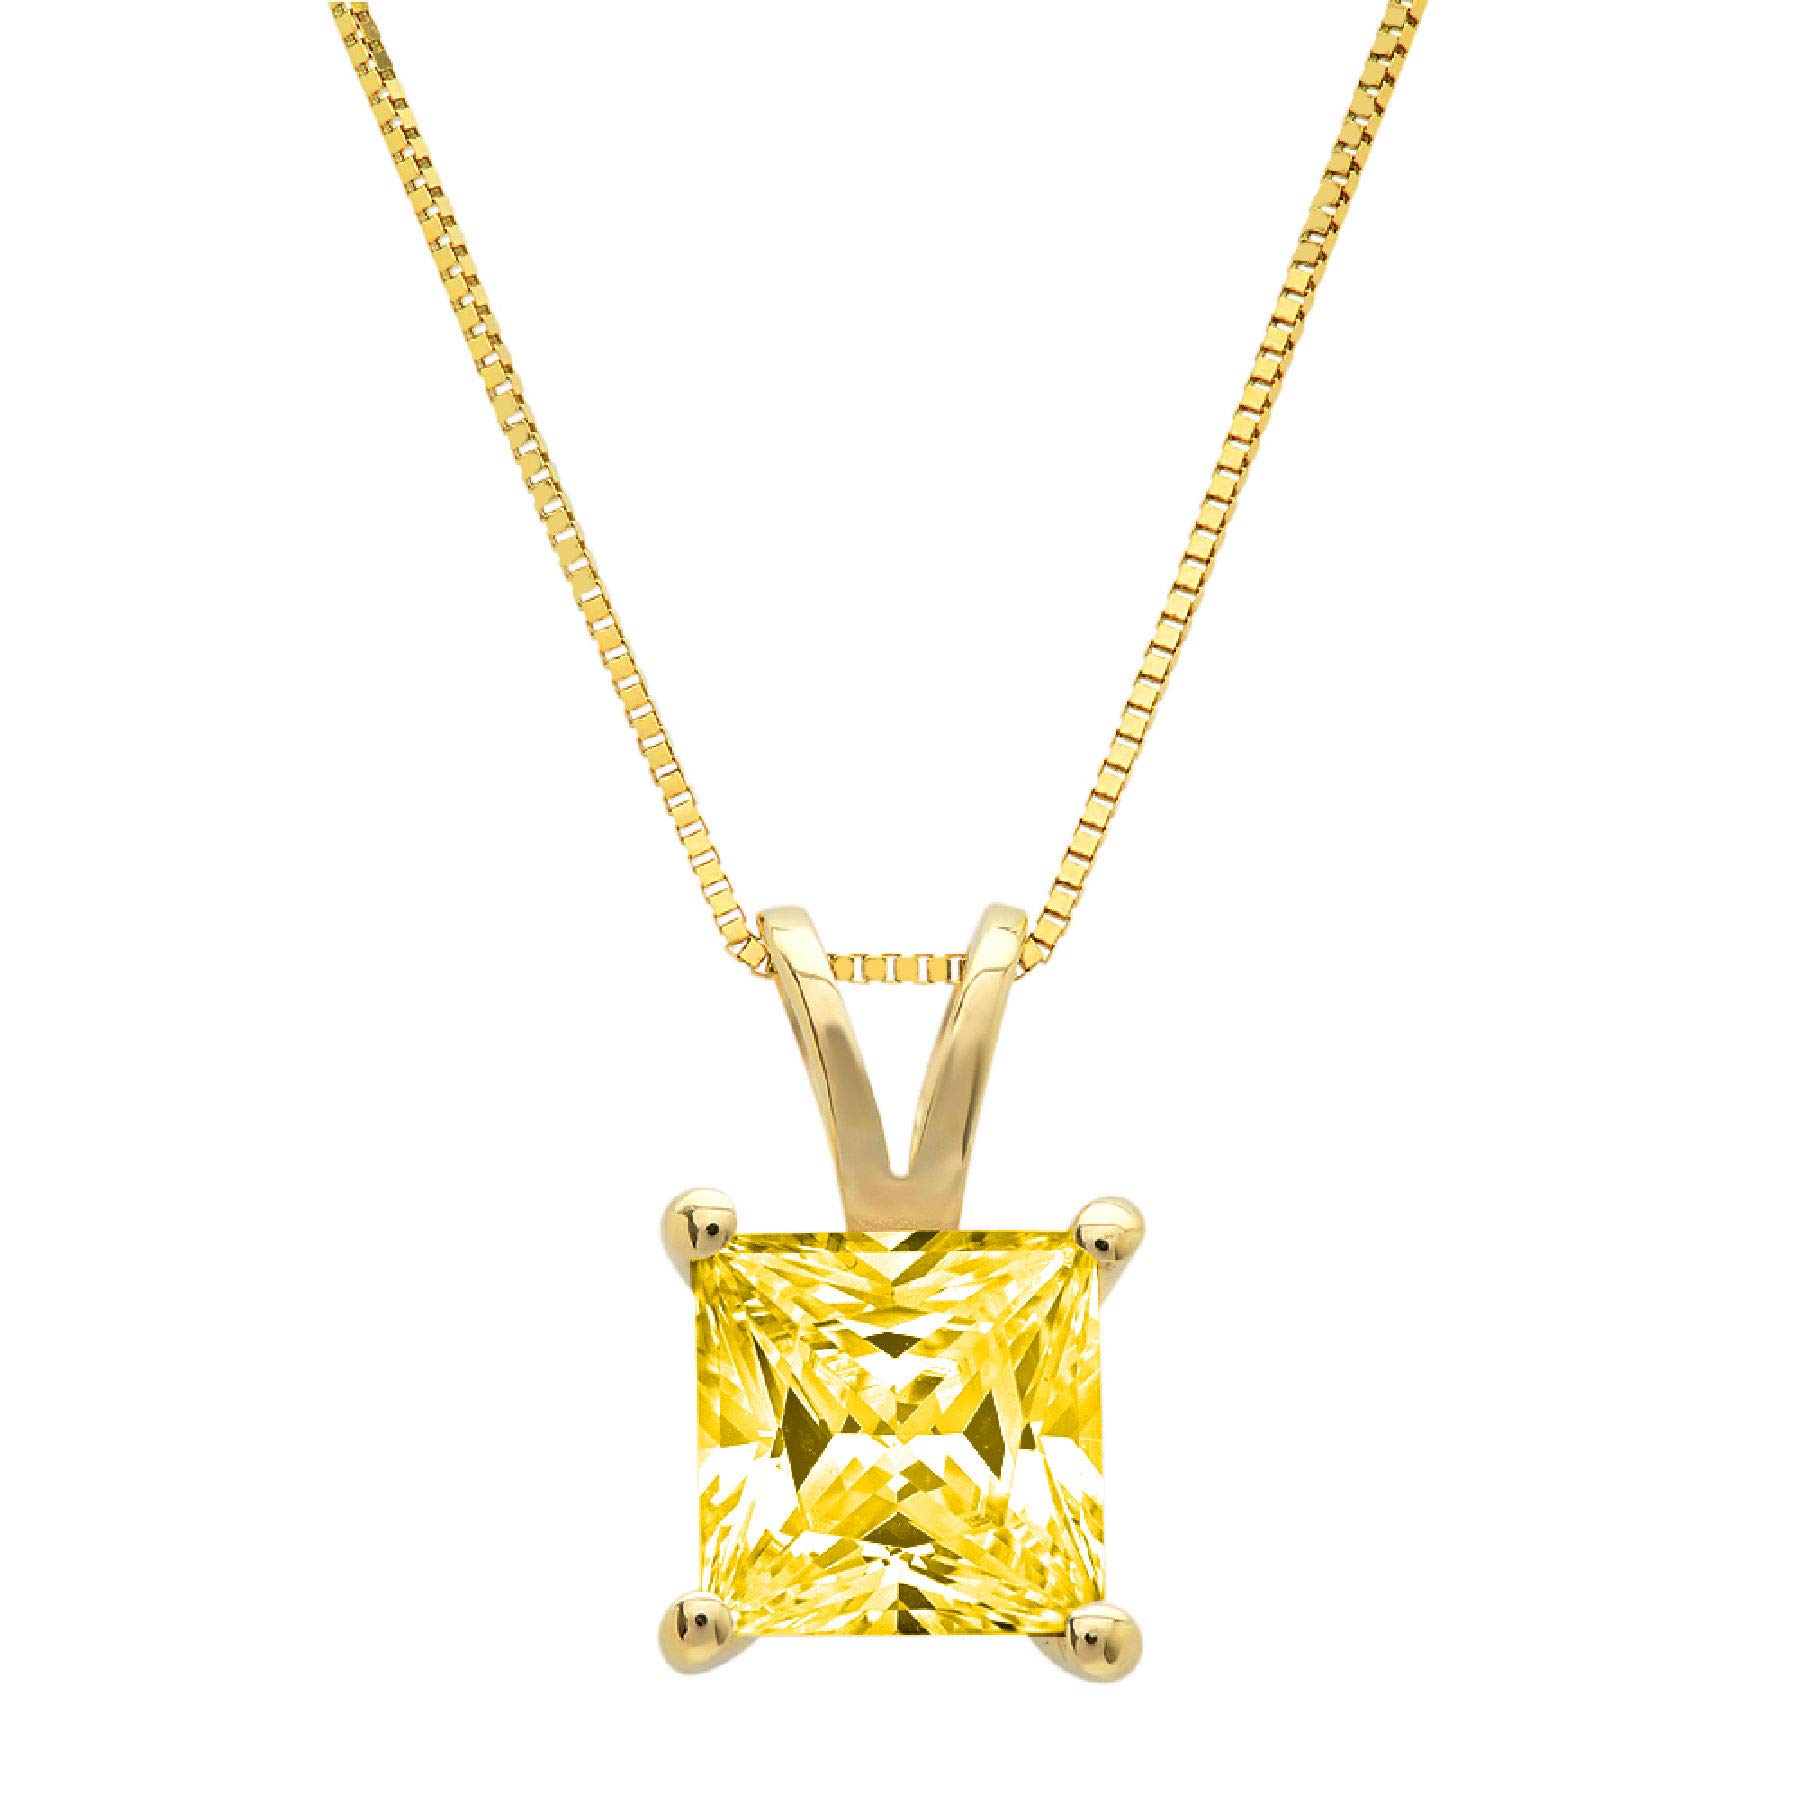 Clara Pucci 1.6 ct Brilliant Princess Cut Stunning Genuine Flawless Yellow Simulated Diamond Gemstone Solitaire Pendant Necklace With 16